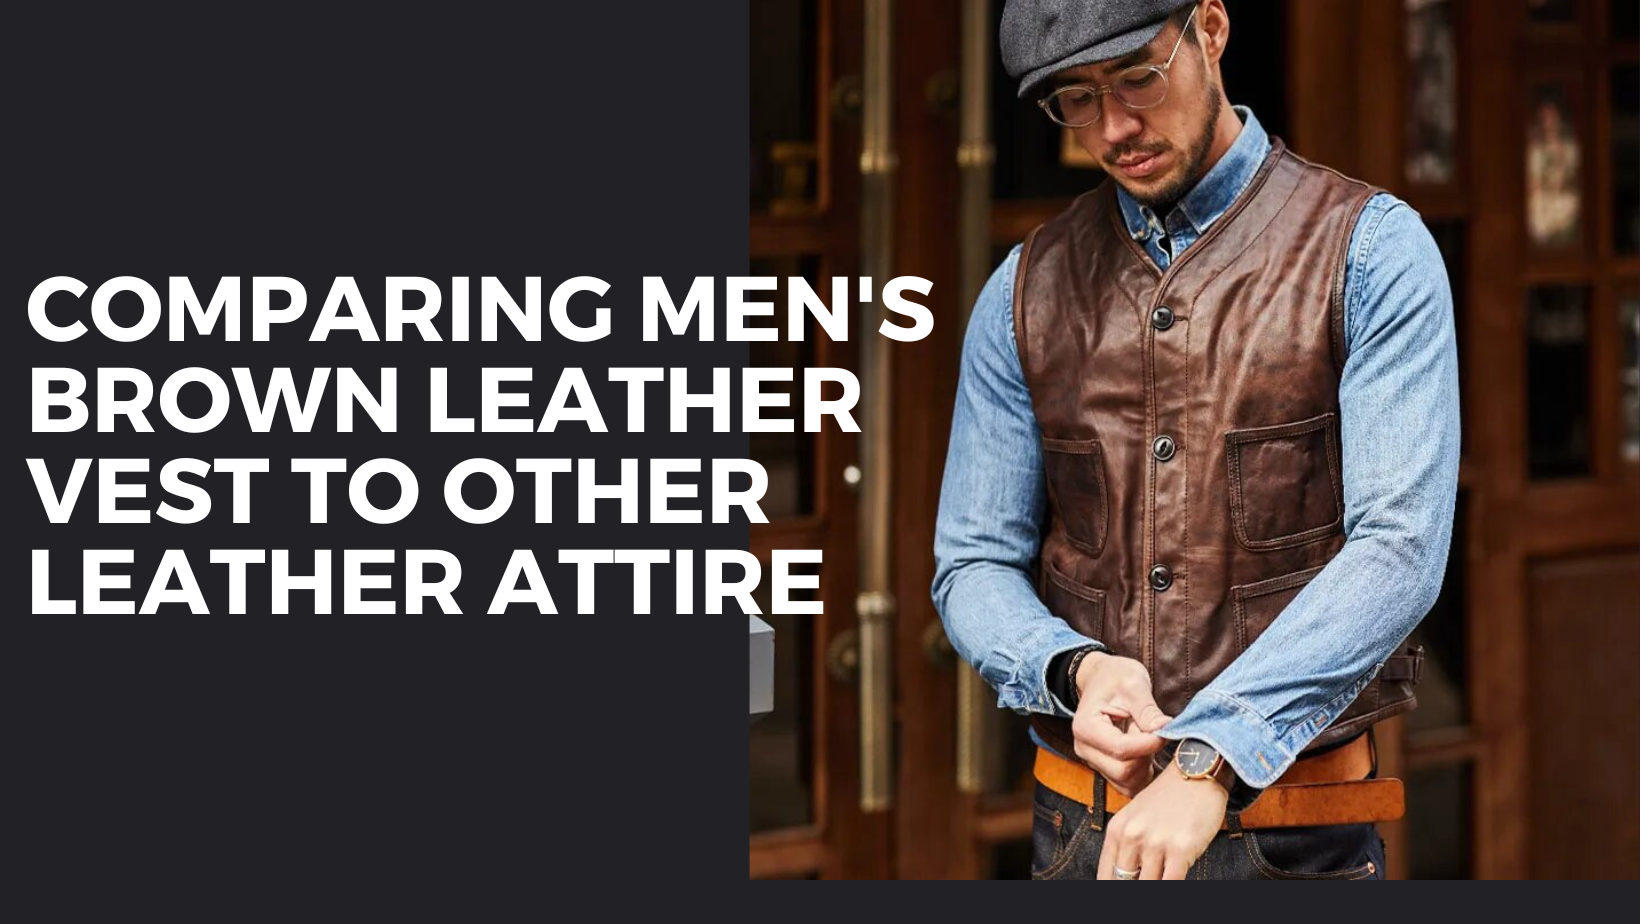 Comparing Men's Brown Leather Vest to Other Leather Attire